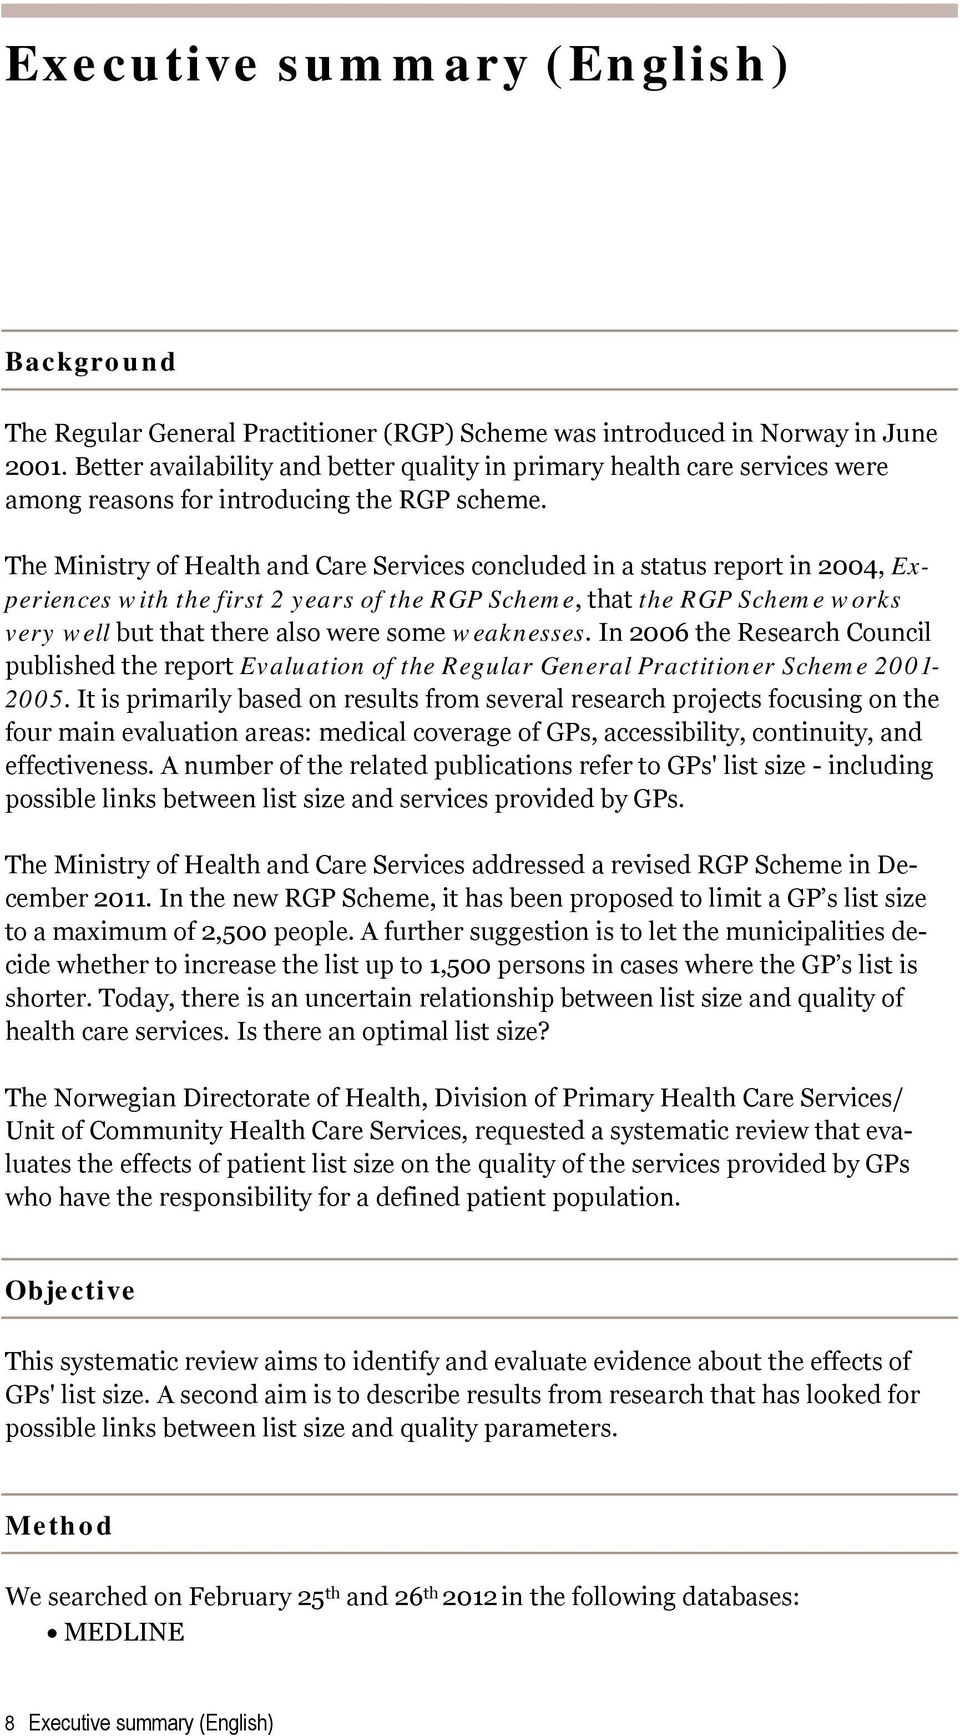 The Ministry of Health and Care Services concluded in a status report in 2004, Experiences with the first 2 years of the RGP Scheme, that the RGP Scheme works very well but that there also were some